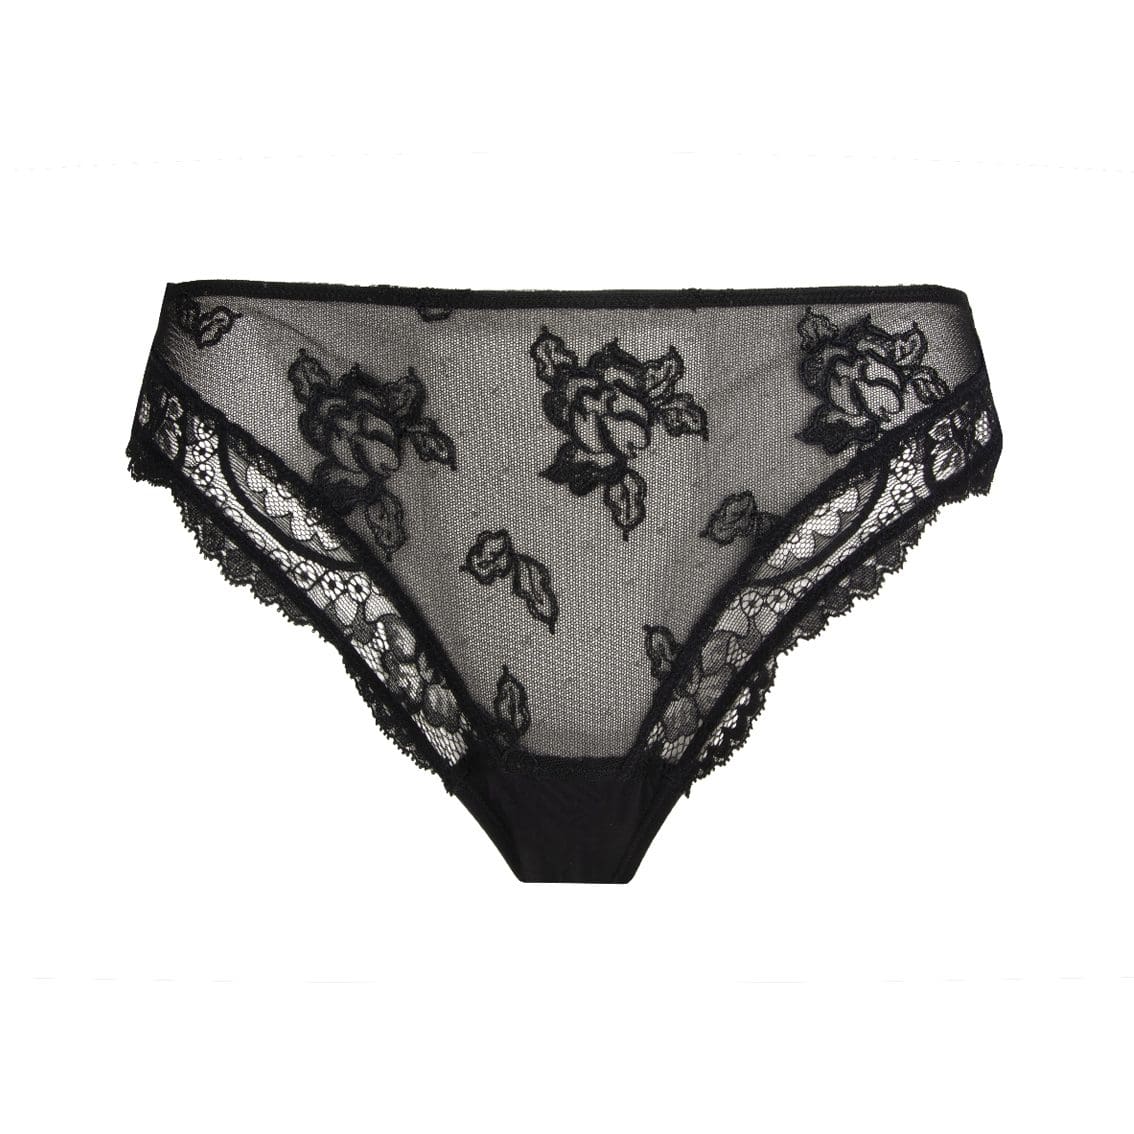 Sublime En Dentelle Italian Brief Nude - For Her from The Luxe Company UK